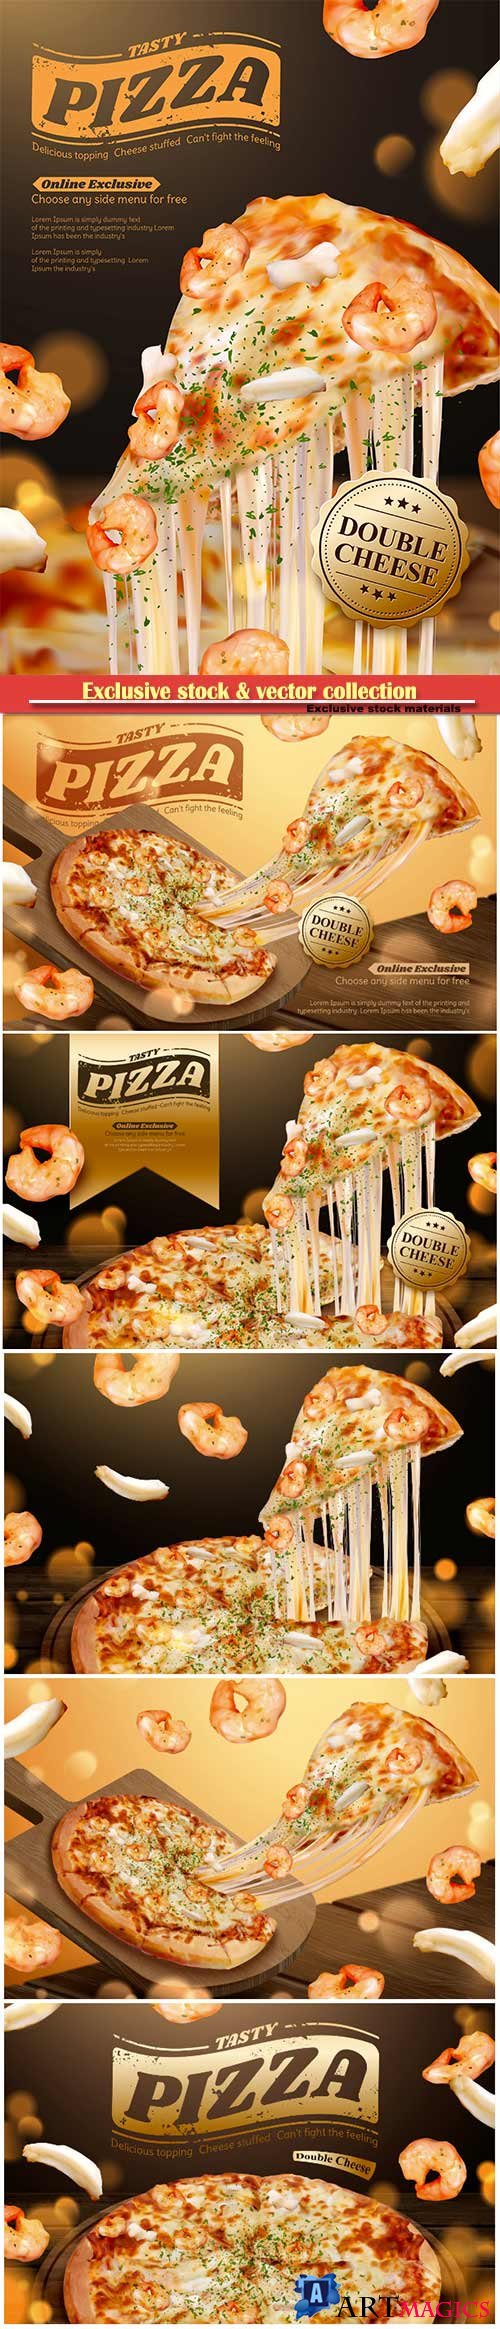 Tasty seafood pizza ads with stringy cheese in 3d illustration, shrimp and squid ring ingredients